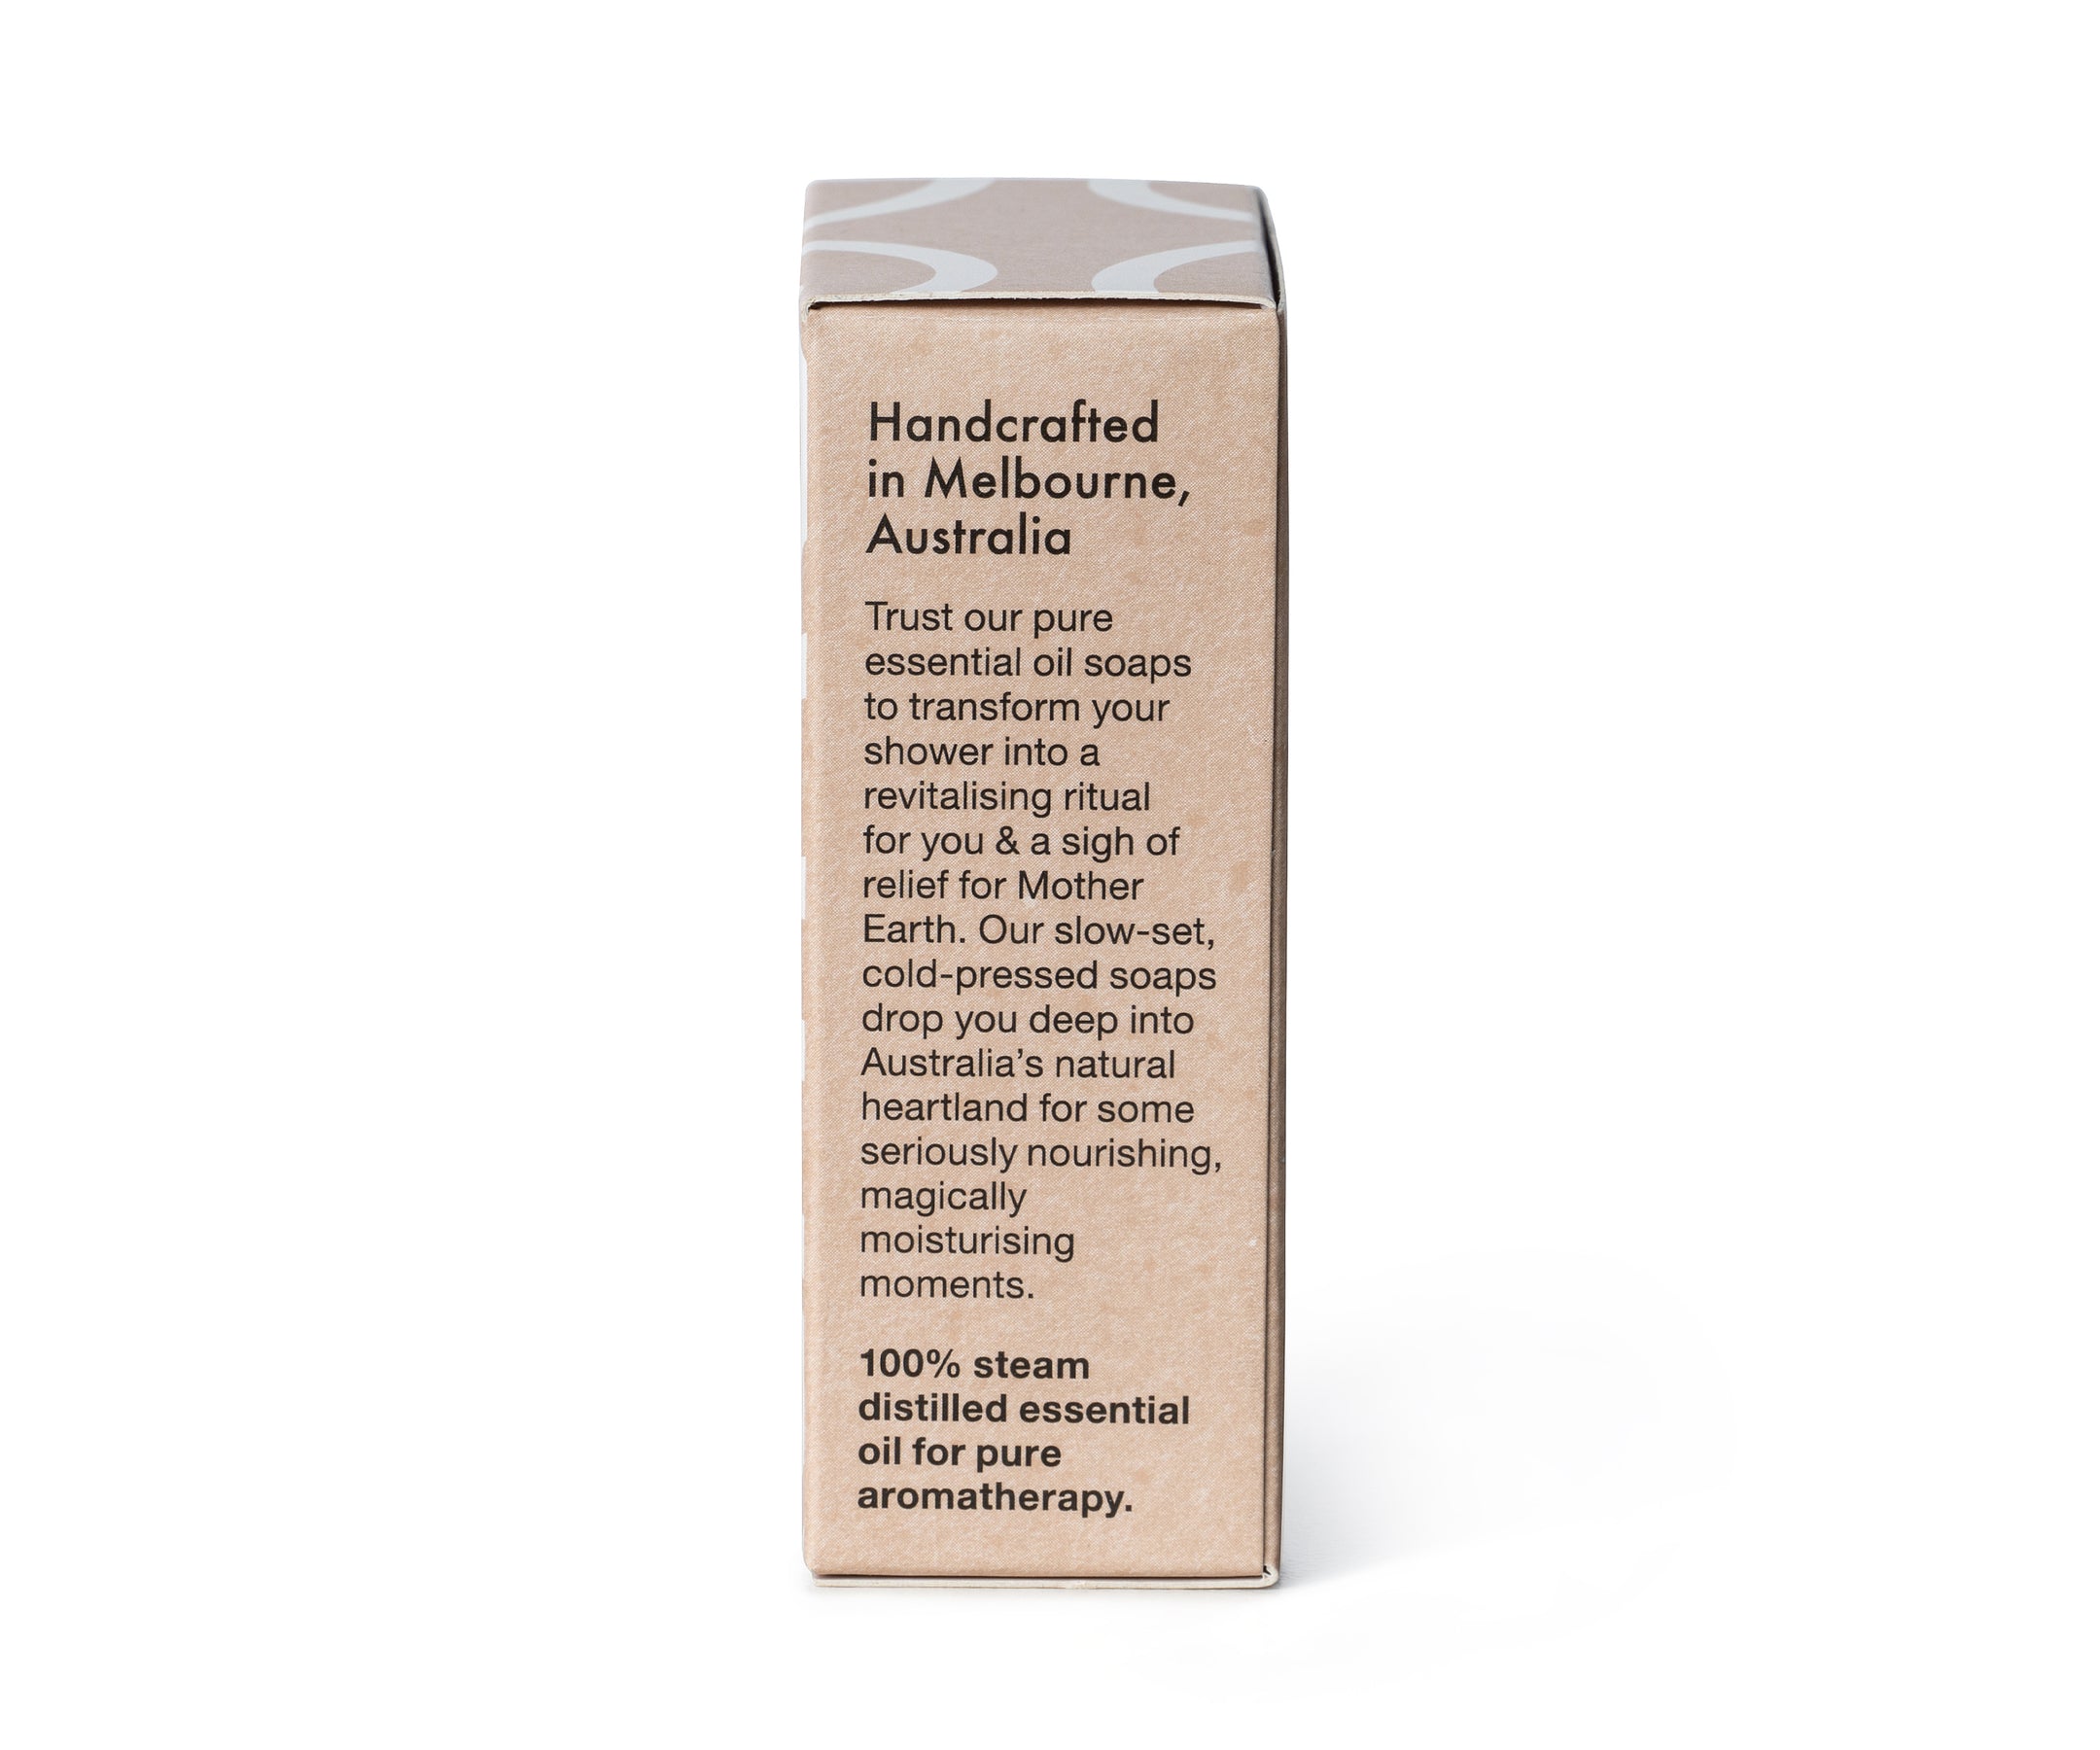 Australian Natural Soap Company peppermint and pumice hand and body bar right side of box